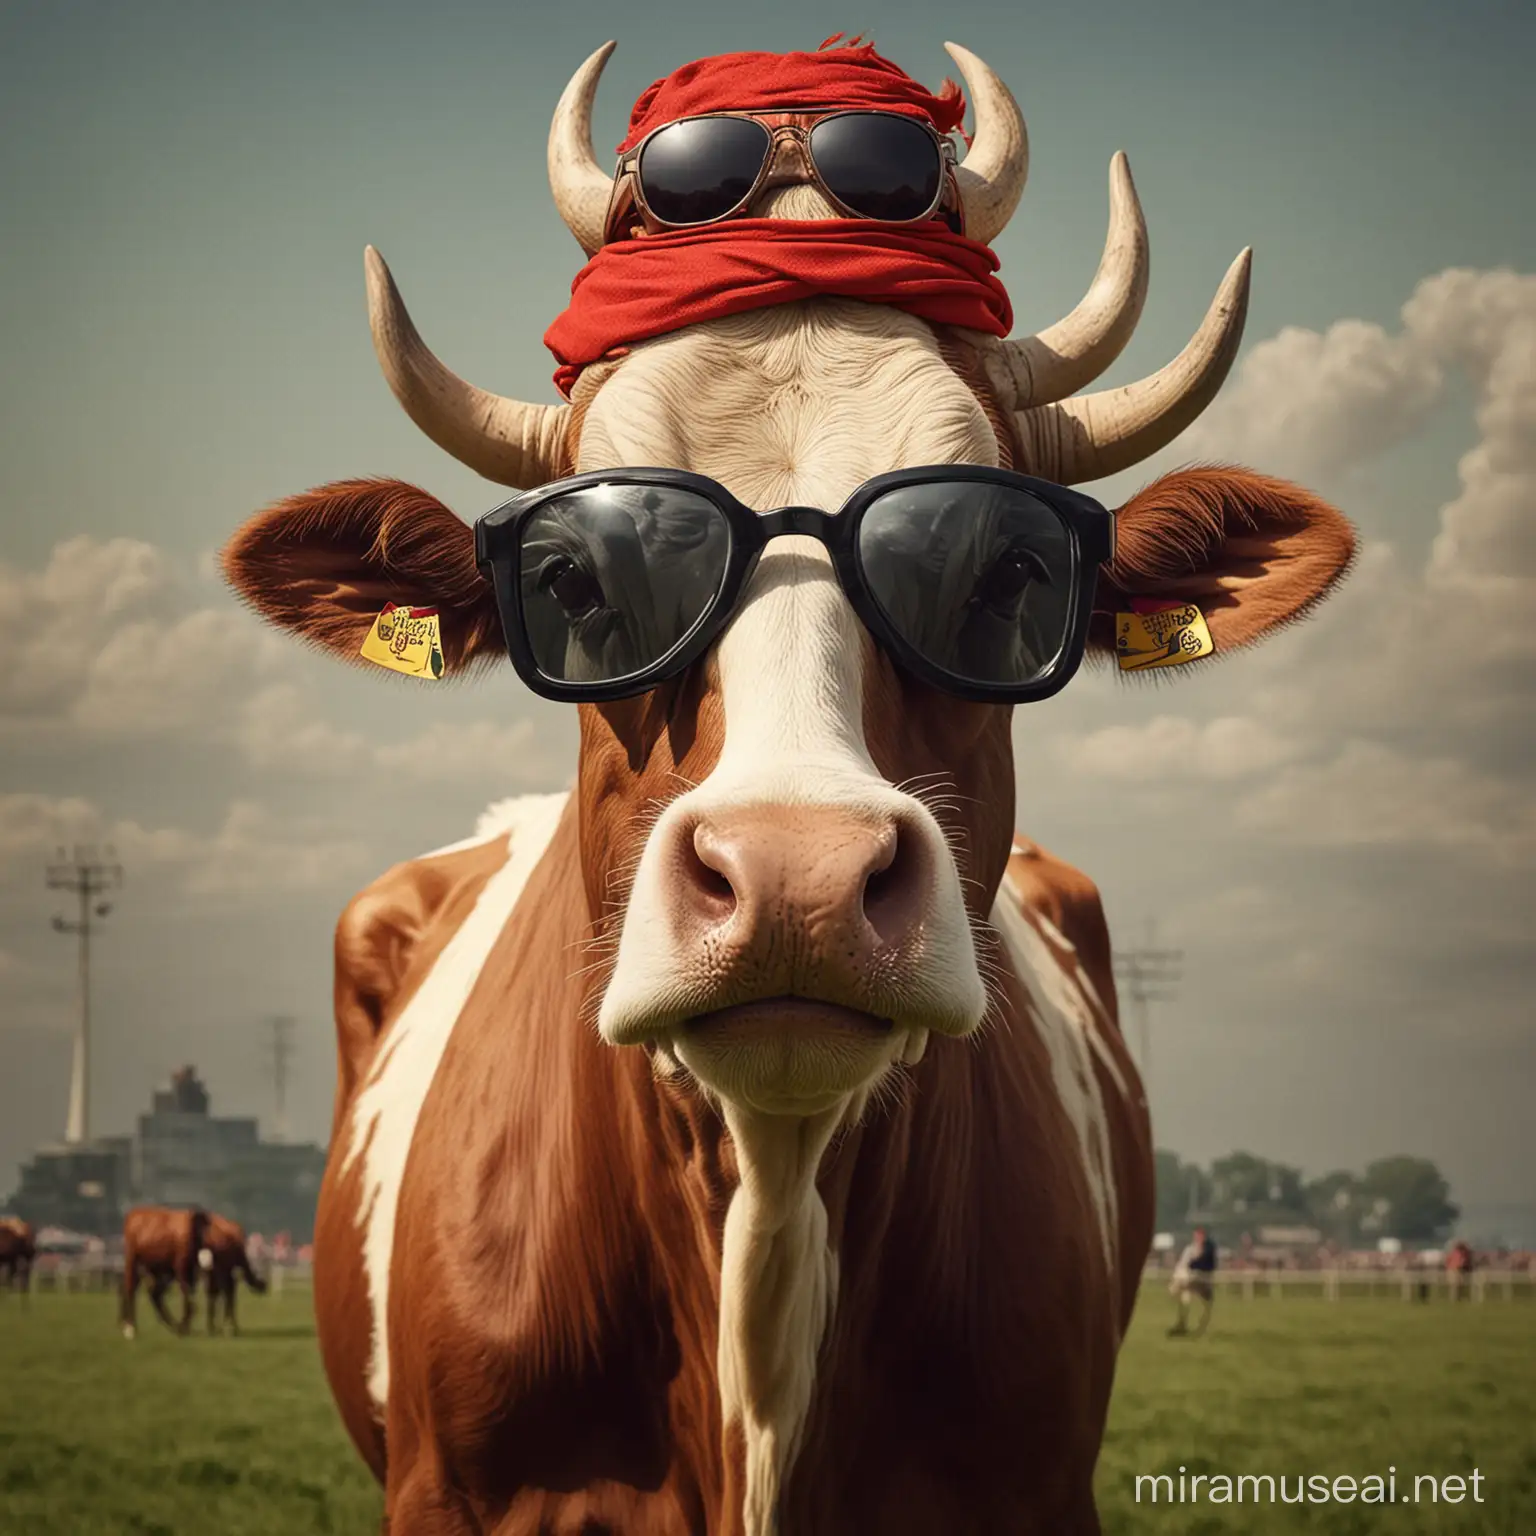  Liverpool with a cow on its head and sunglasses loses Manchester United wins Liverpool sur and horse and bison